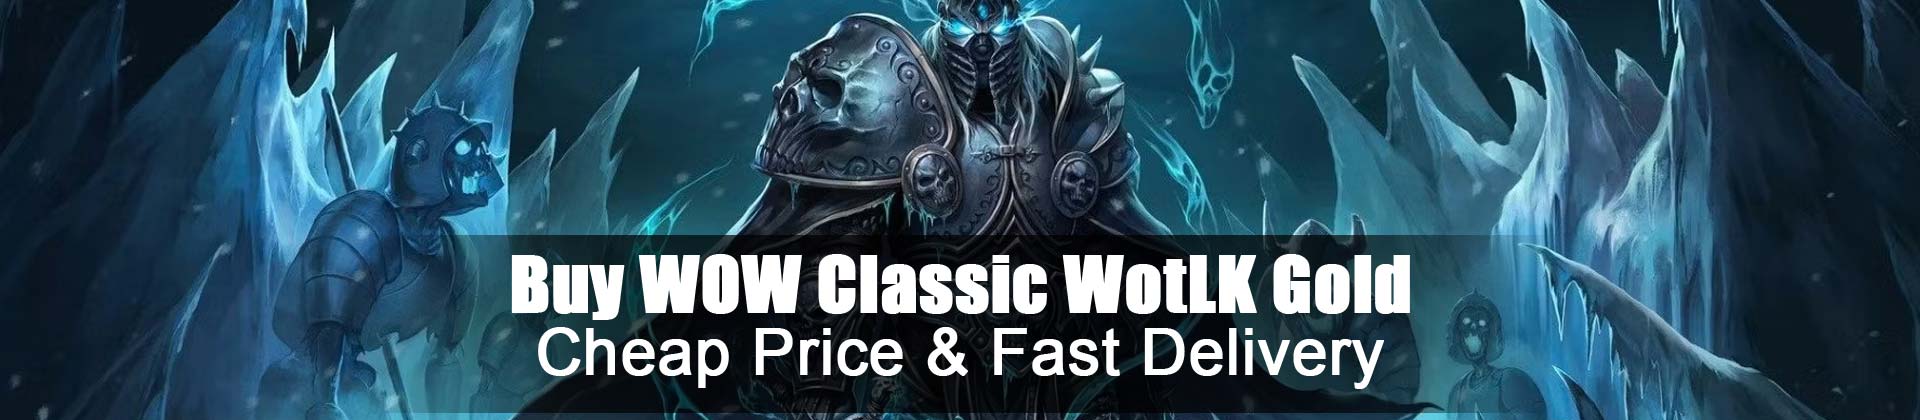 buy wow classic wotlk gold